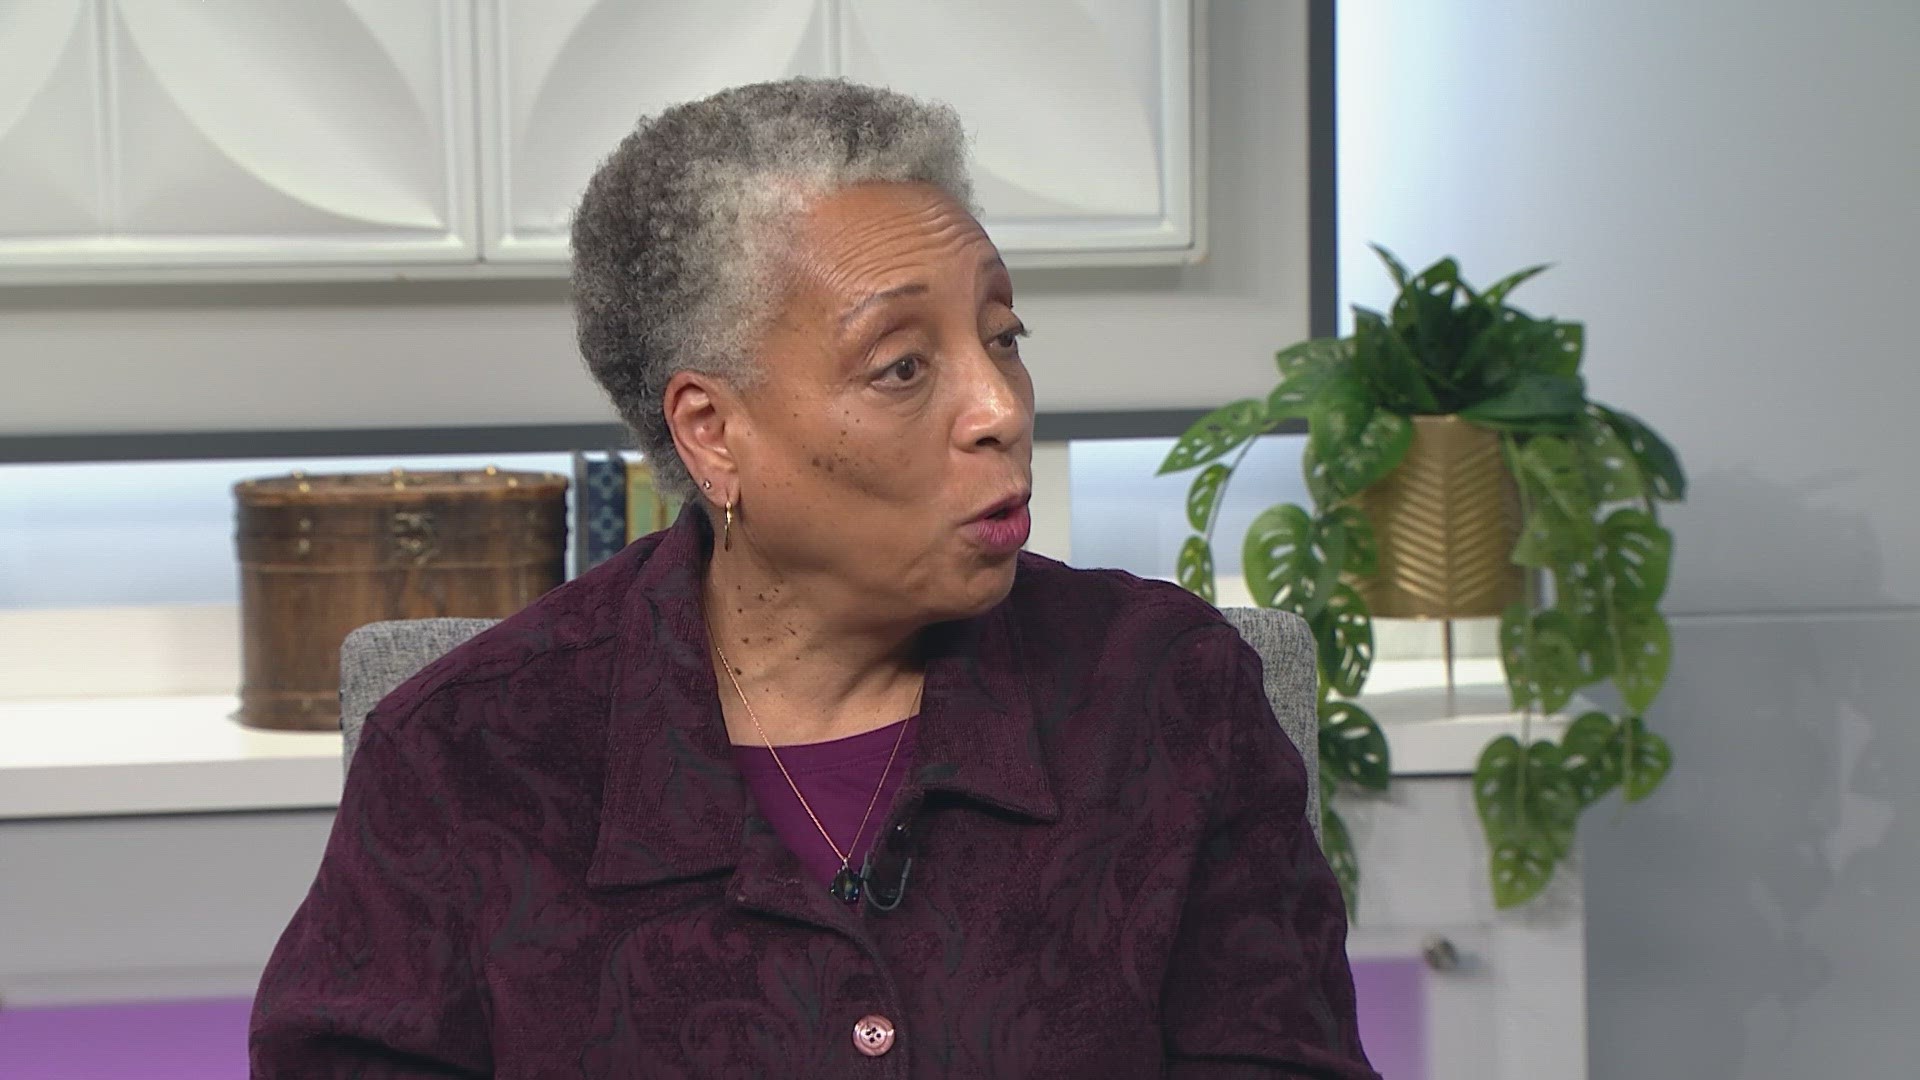 Joining us is historian Terri Gentry whose family was part of shaping history in Colorado.